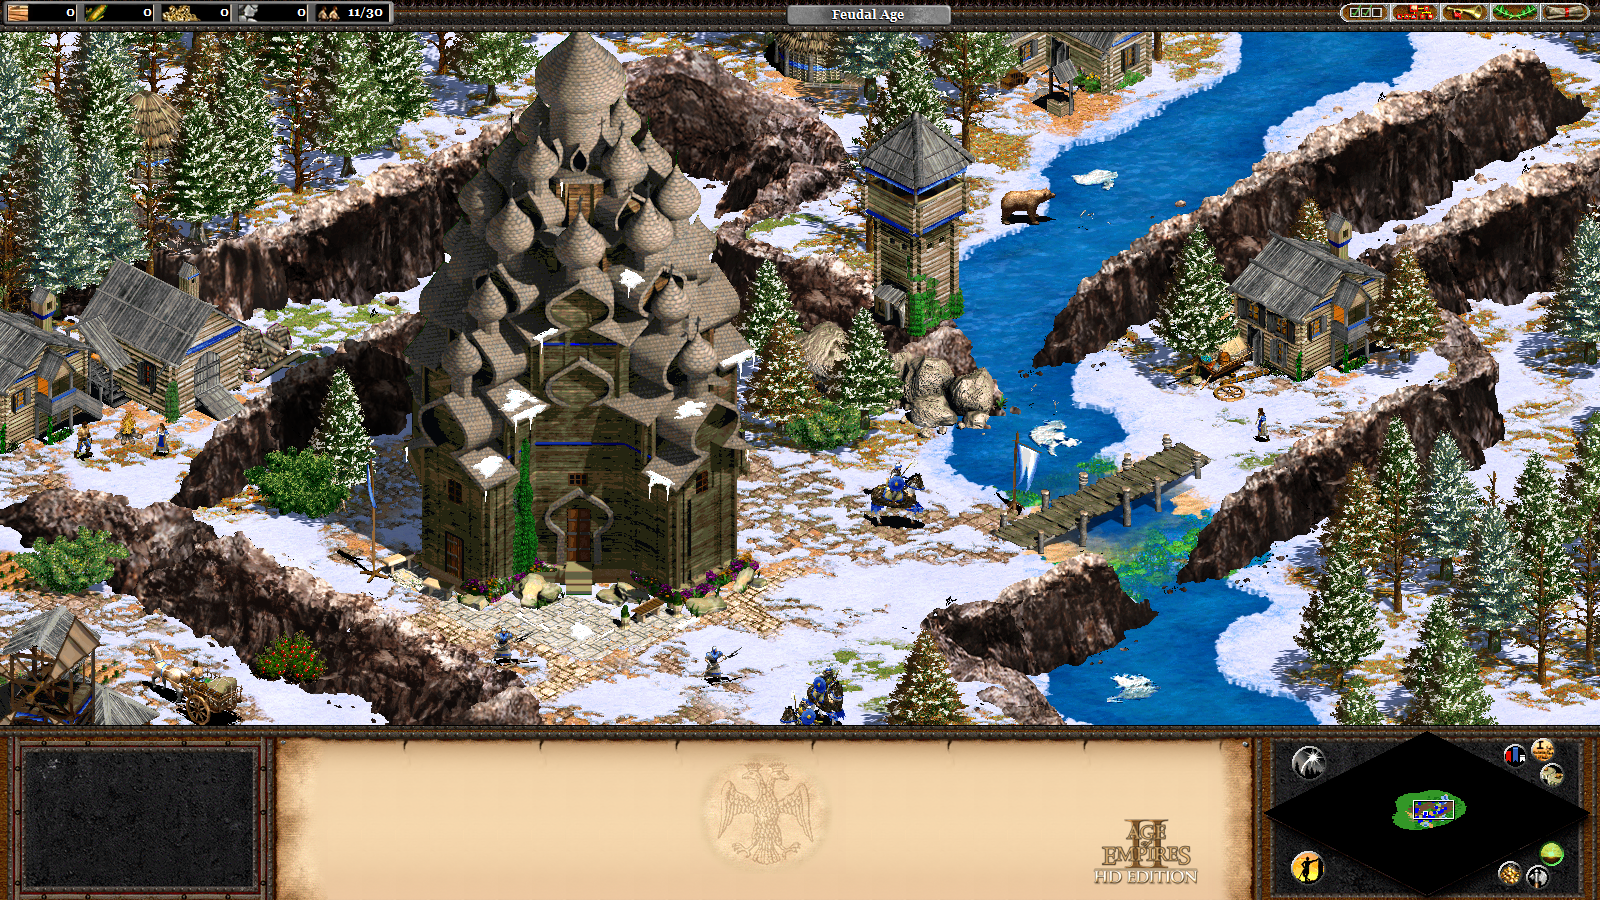 Screenshot for the game Age of Mythology: Extended Edition [v 1.8.2722] (2014) РС | RePack от R.G. Механики